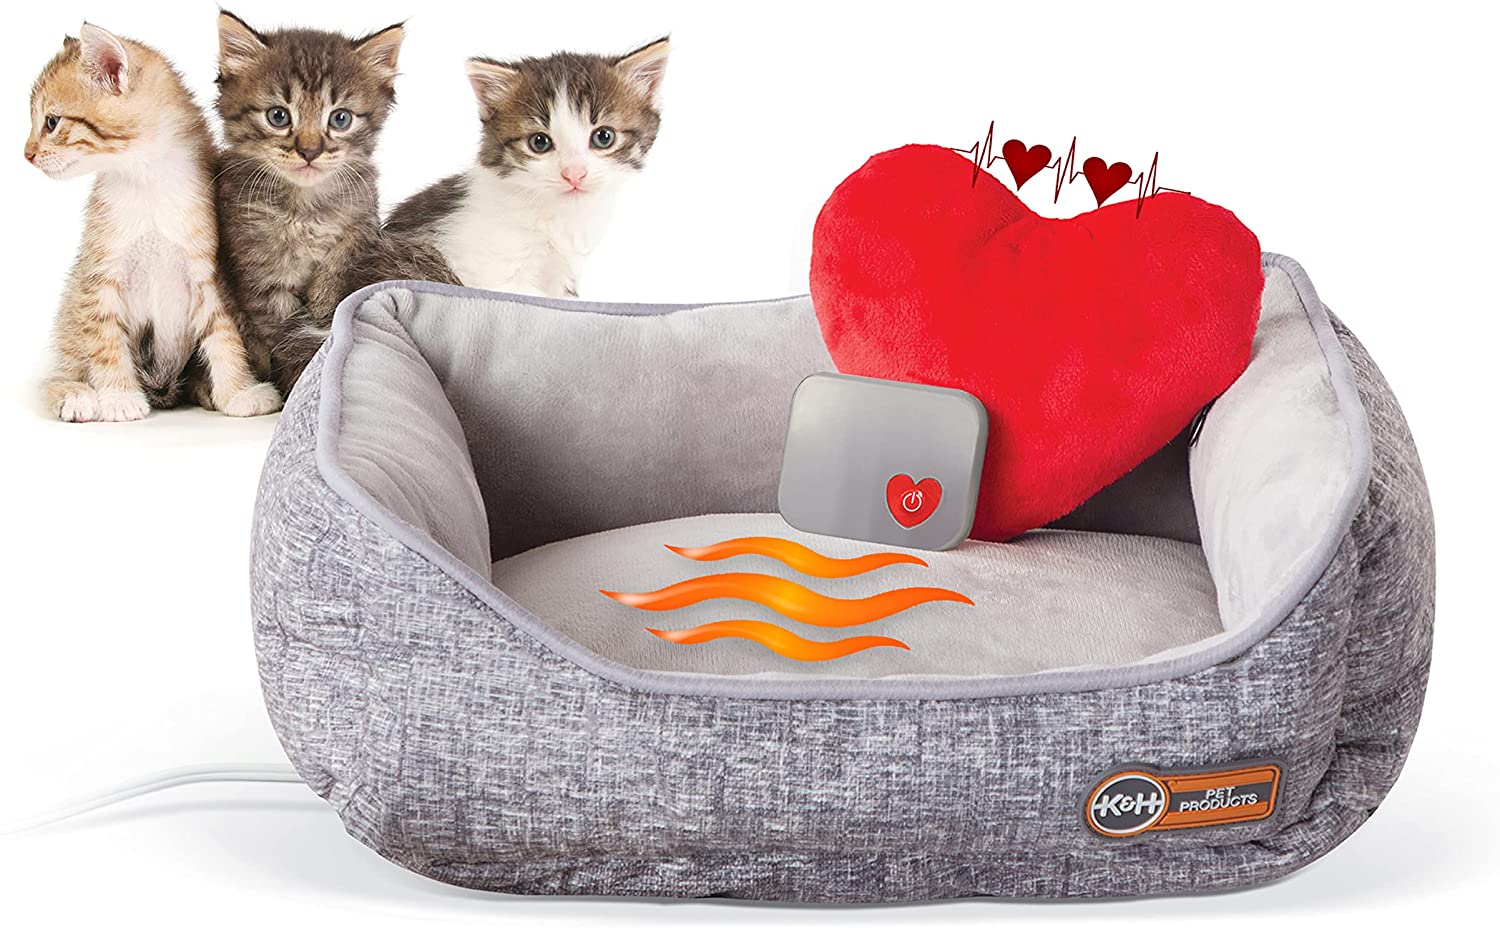 K&H Pet Products Mother’s Heartbeat Heated Kitten Bed